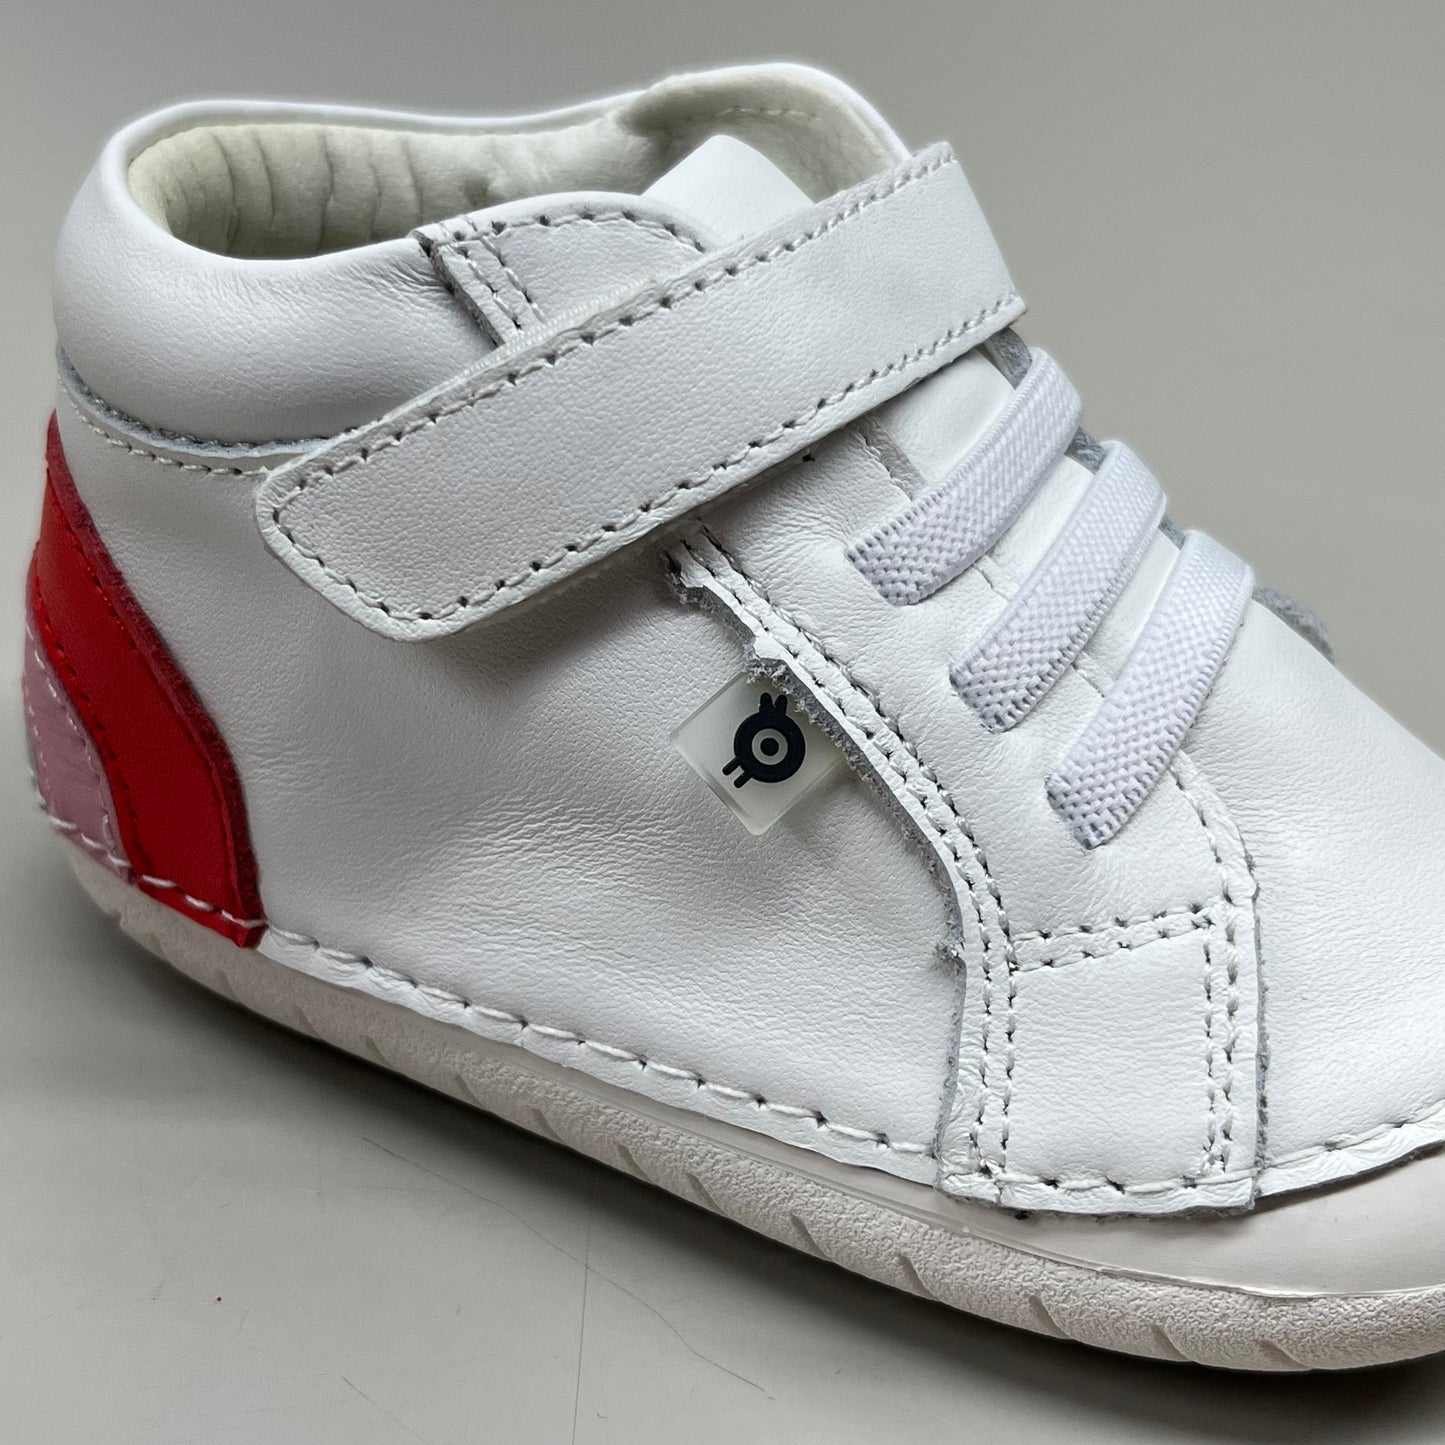 OLD SOLES Baby Champster Leather Shoe Sz 22 US 6 Snow/Red/ Pink/Silver #4091